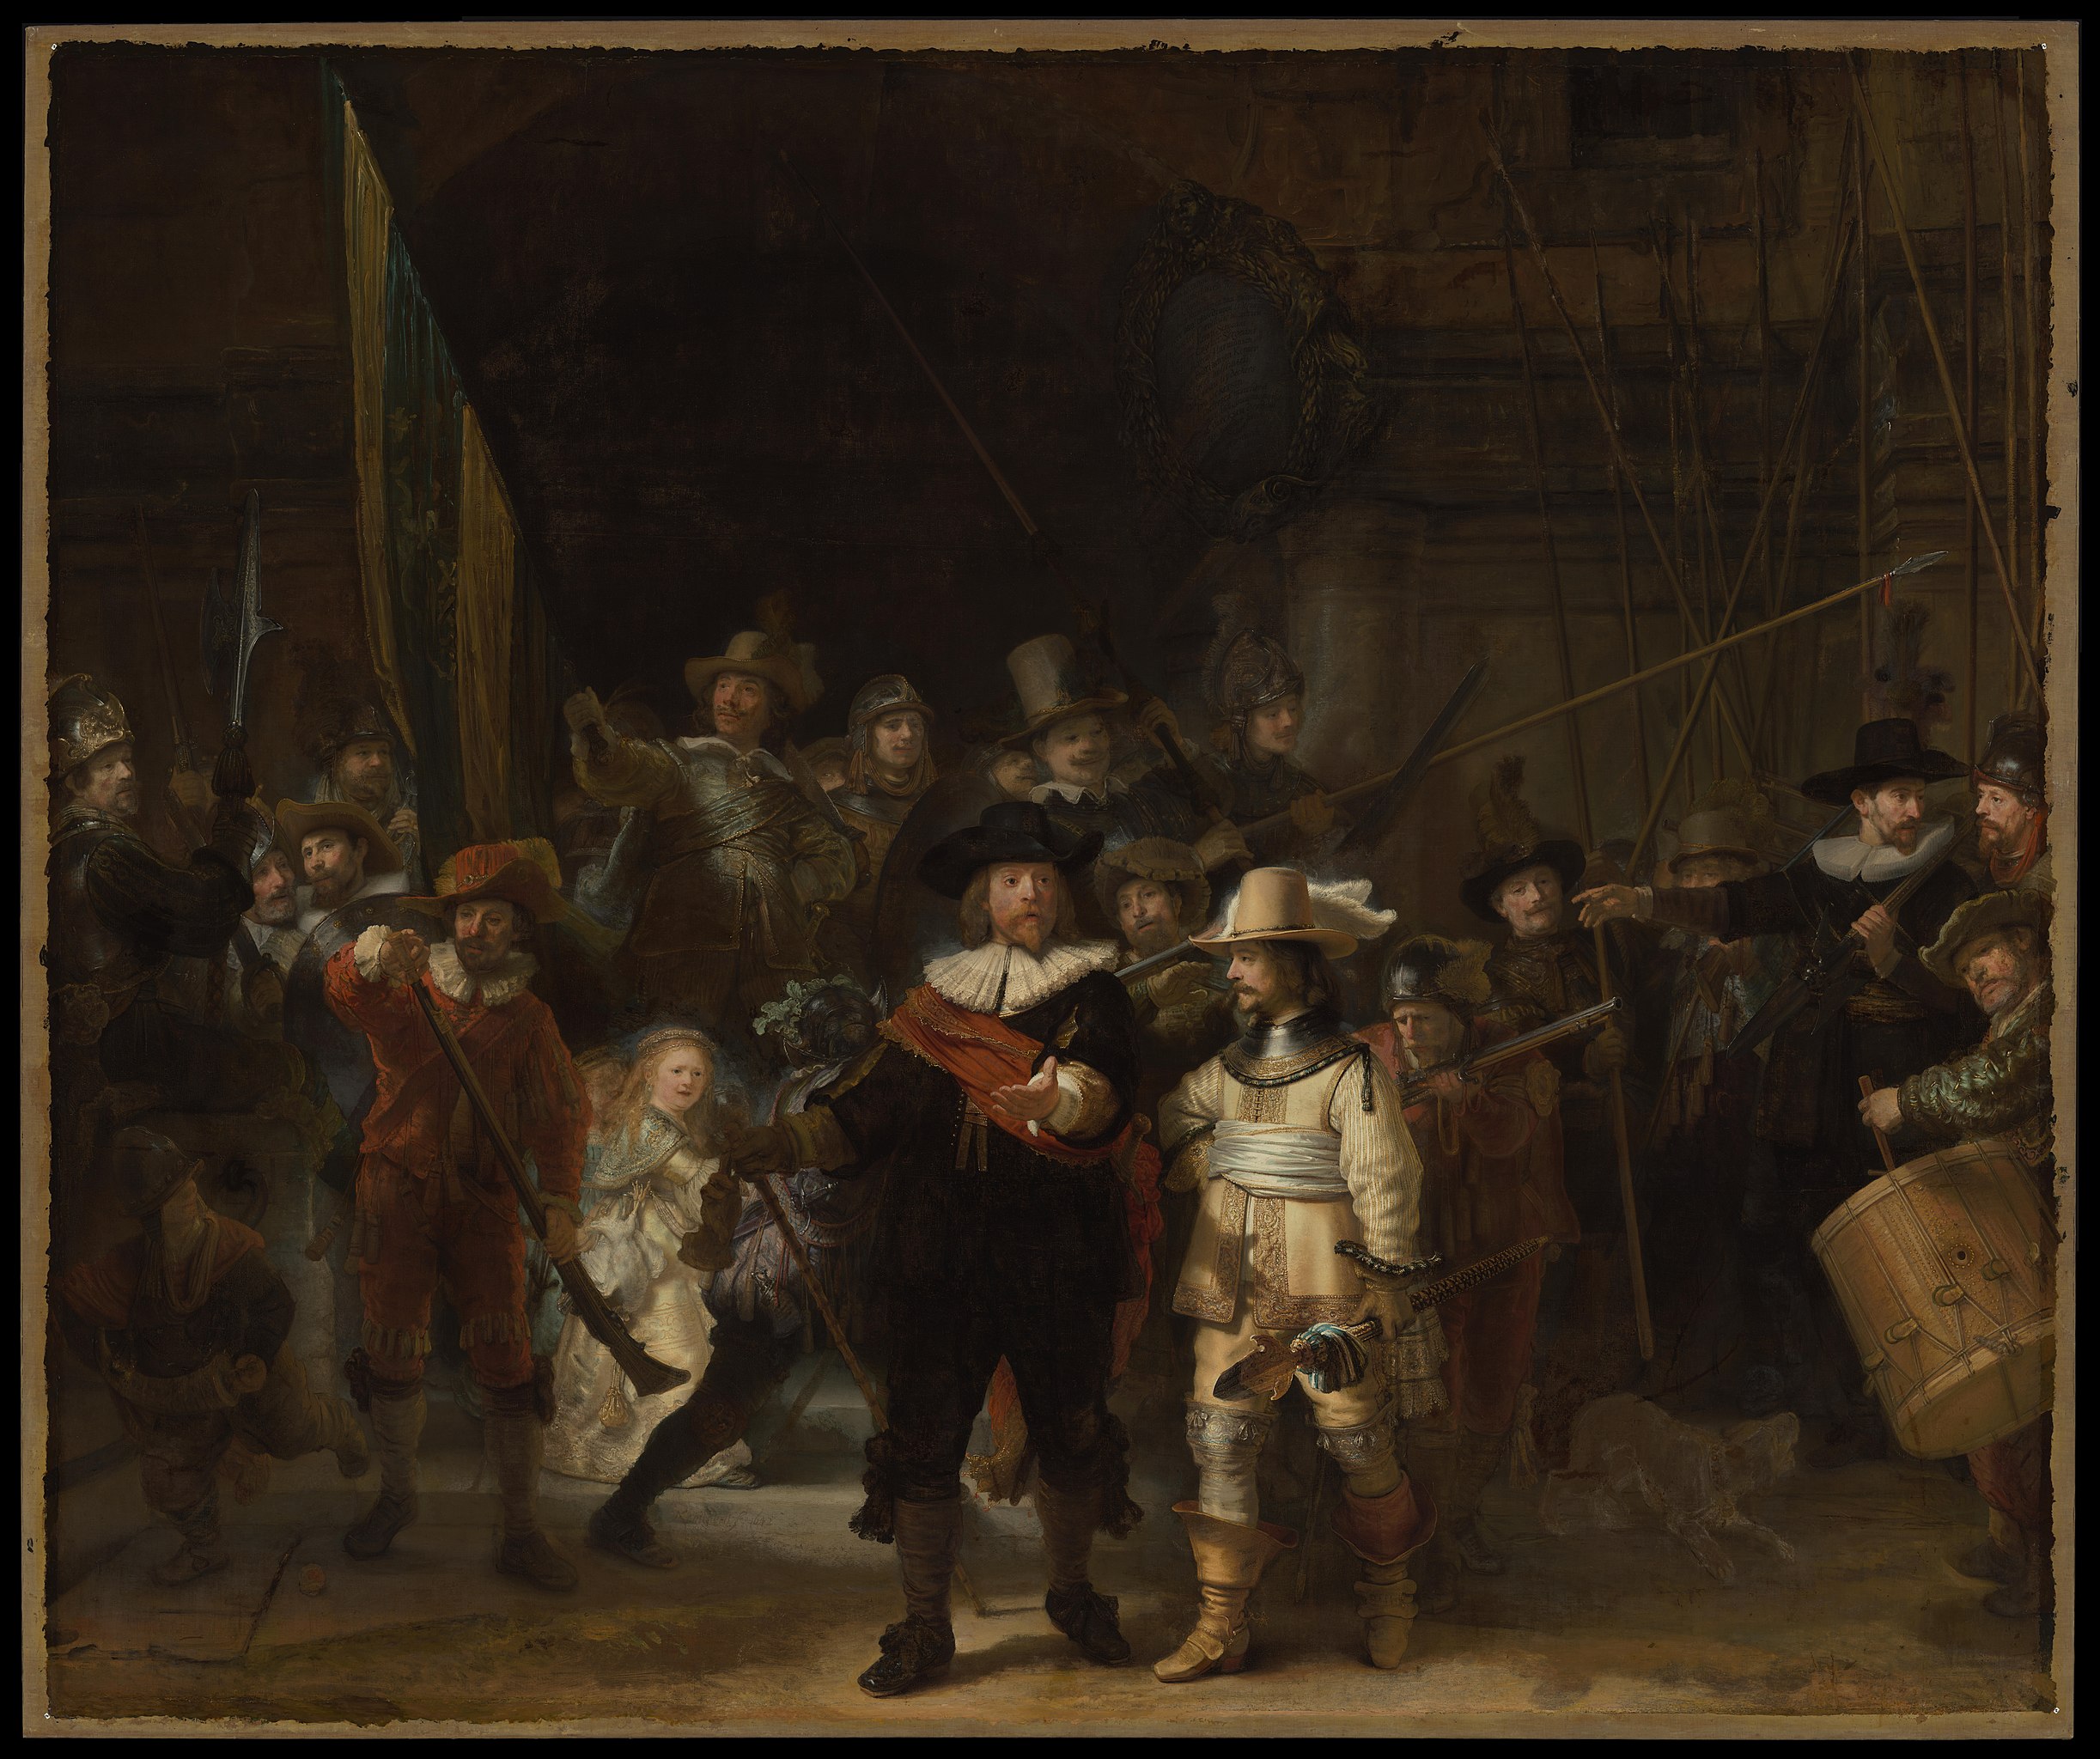 A painting of 17th-century militiamen preparing for their nightly rounds.